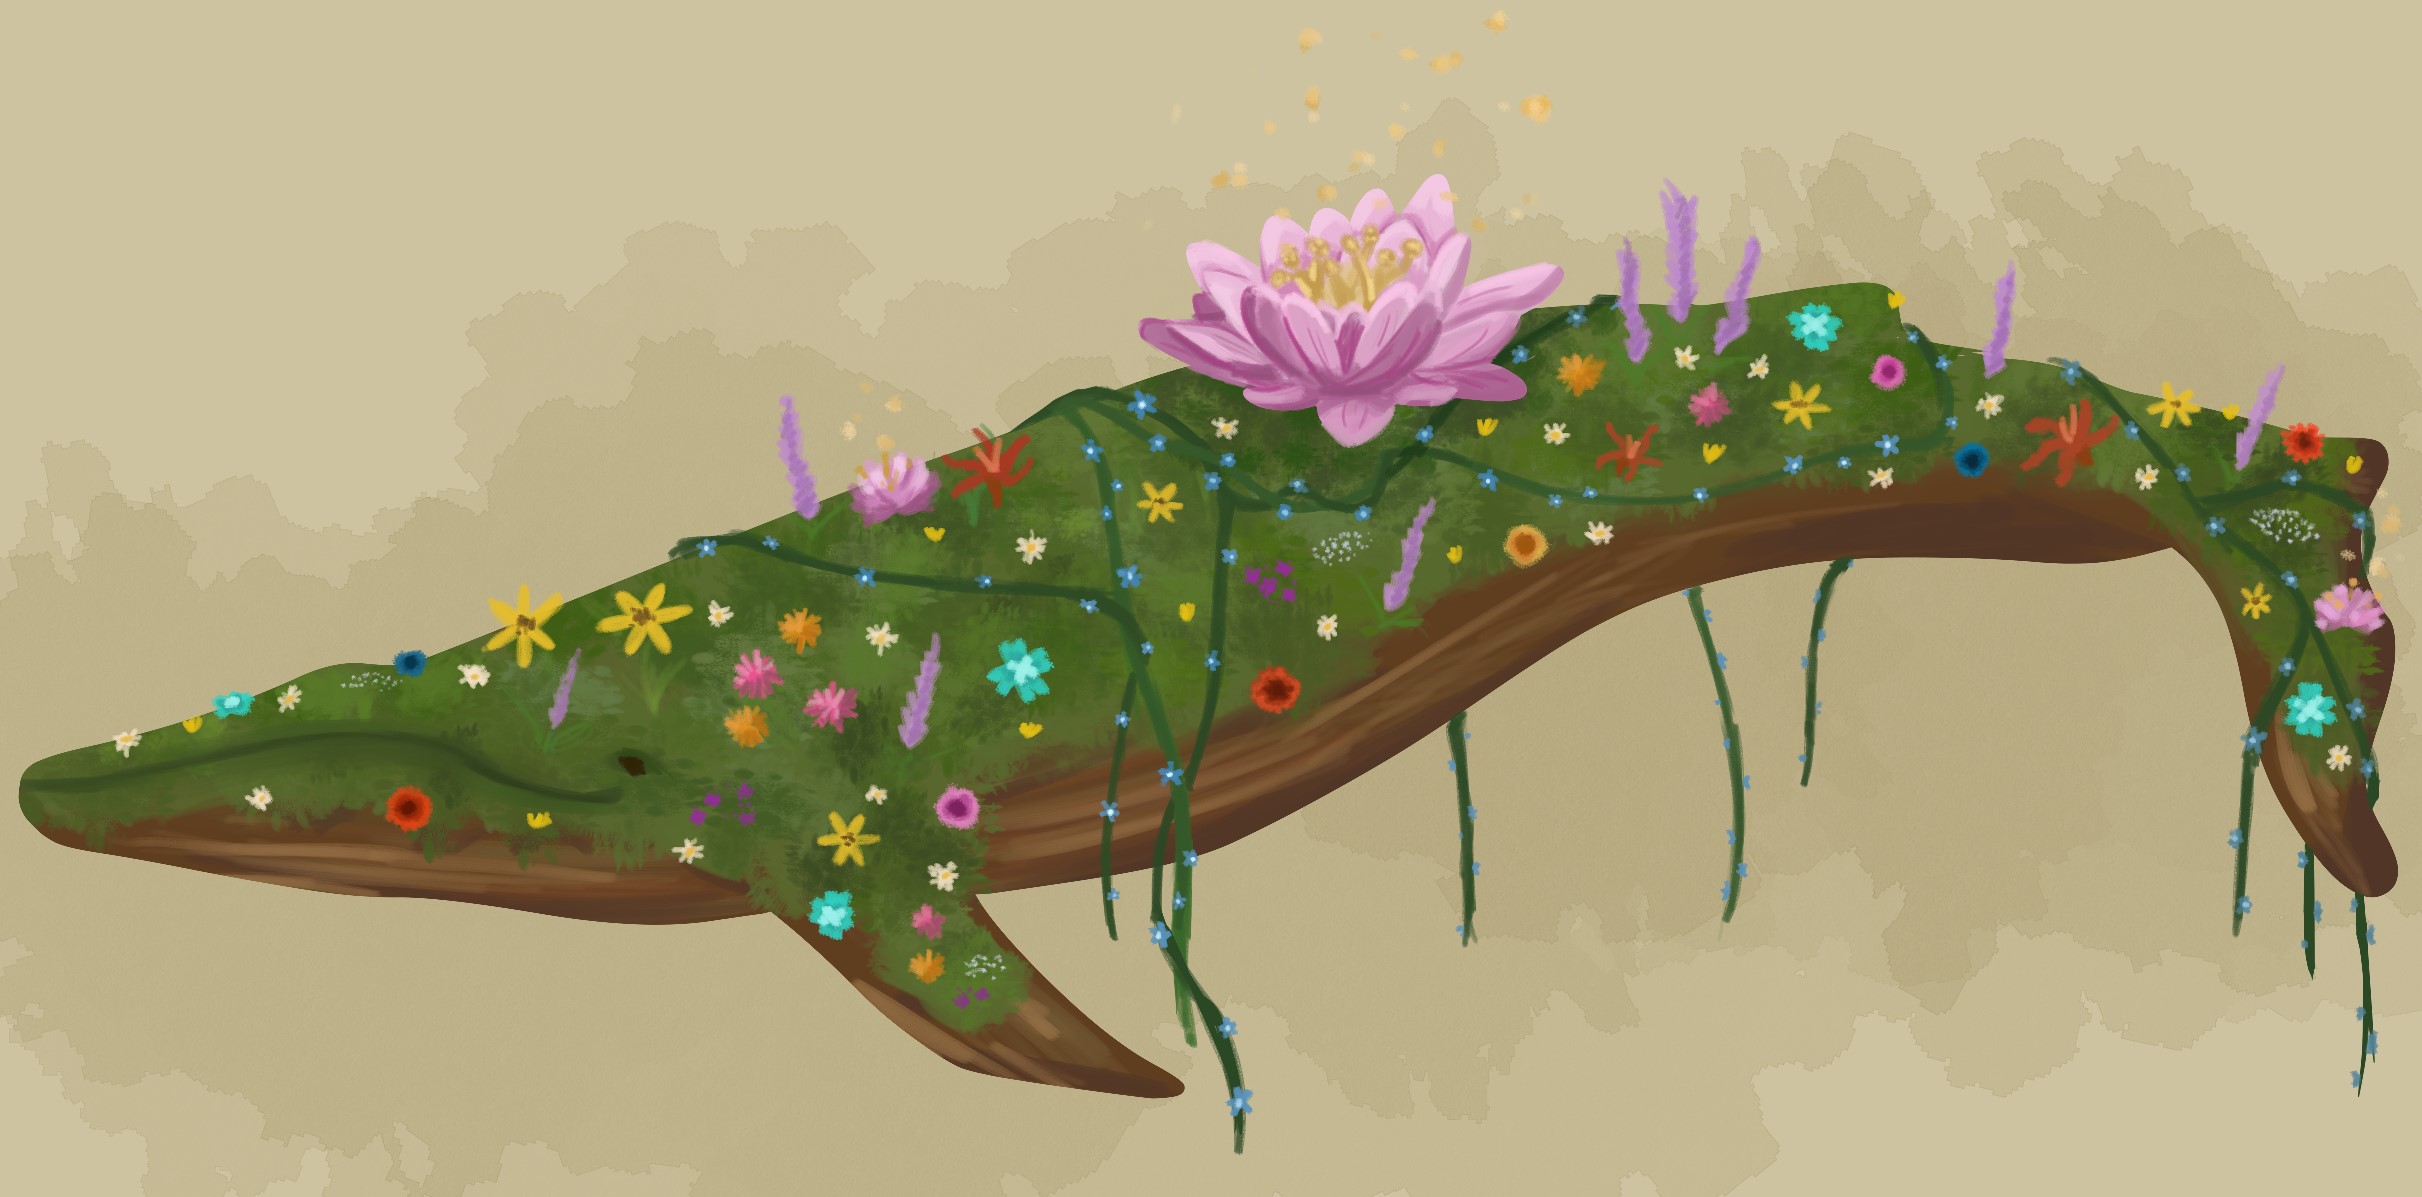 A digital drawing of a blue whale with brown colouration. Its back is covered with moss, vines and flowers. A large lotus flower gives off a faint glow.